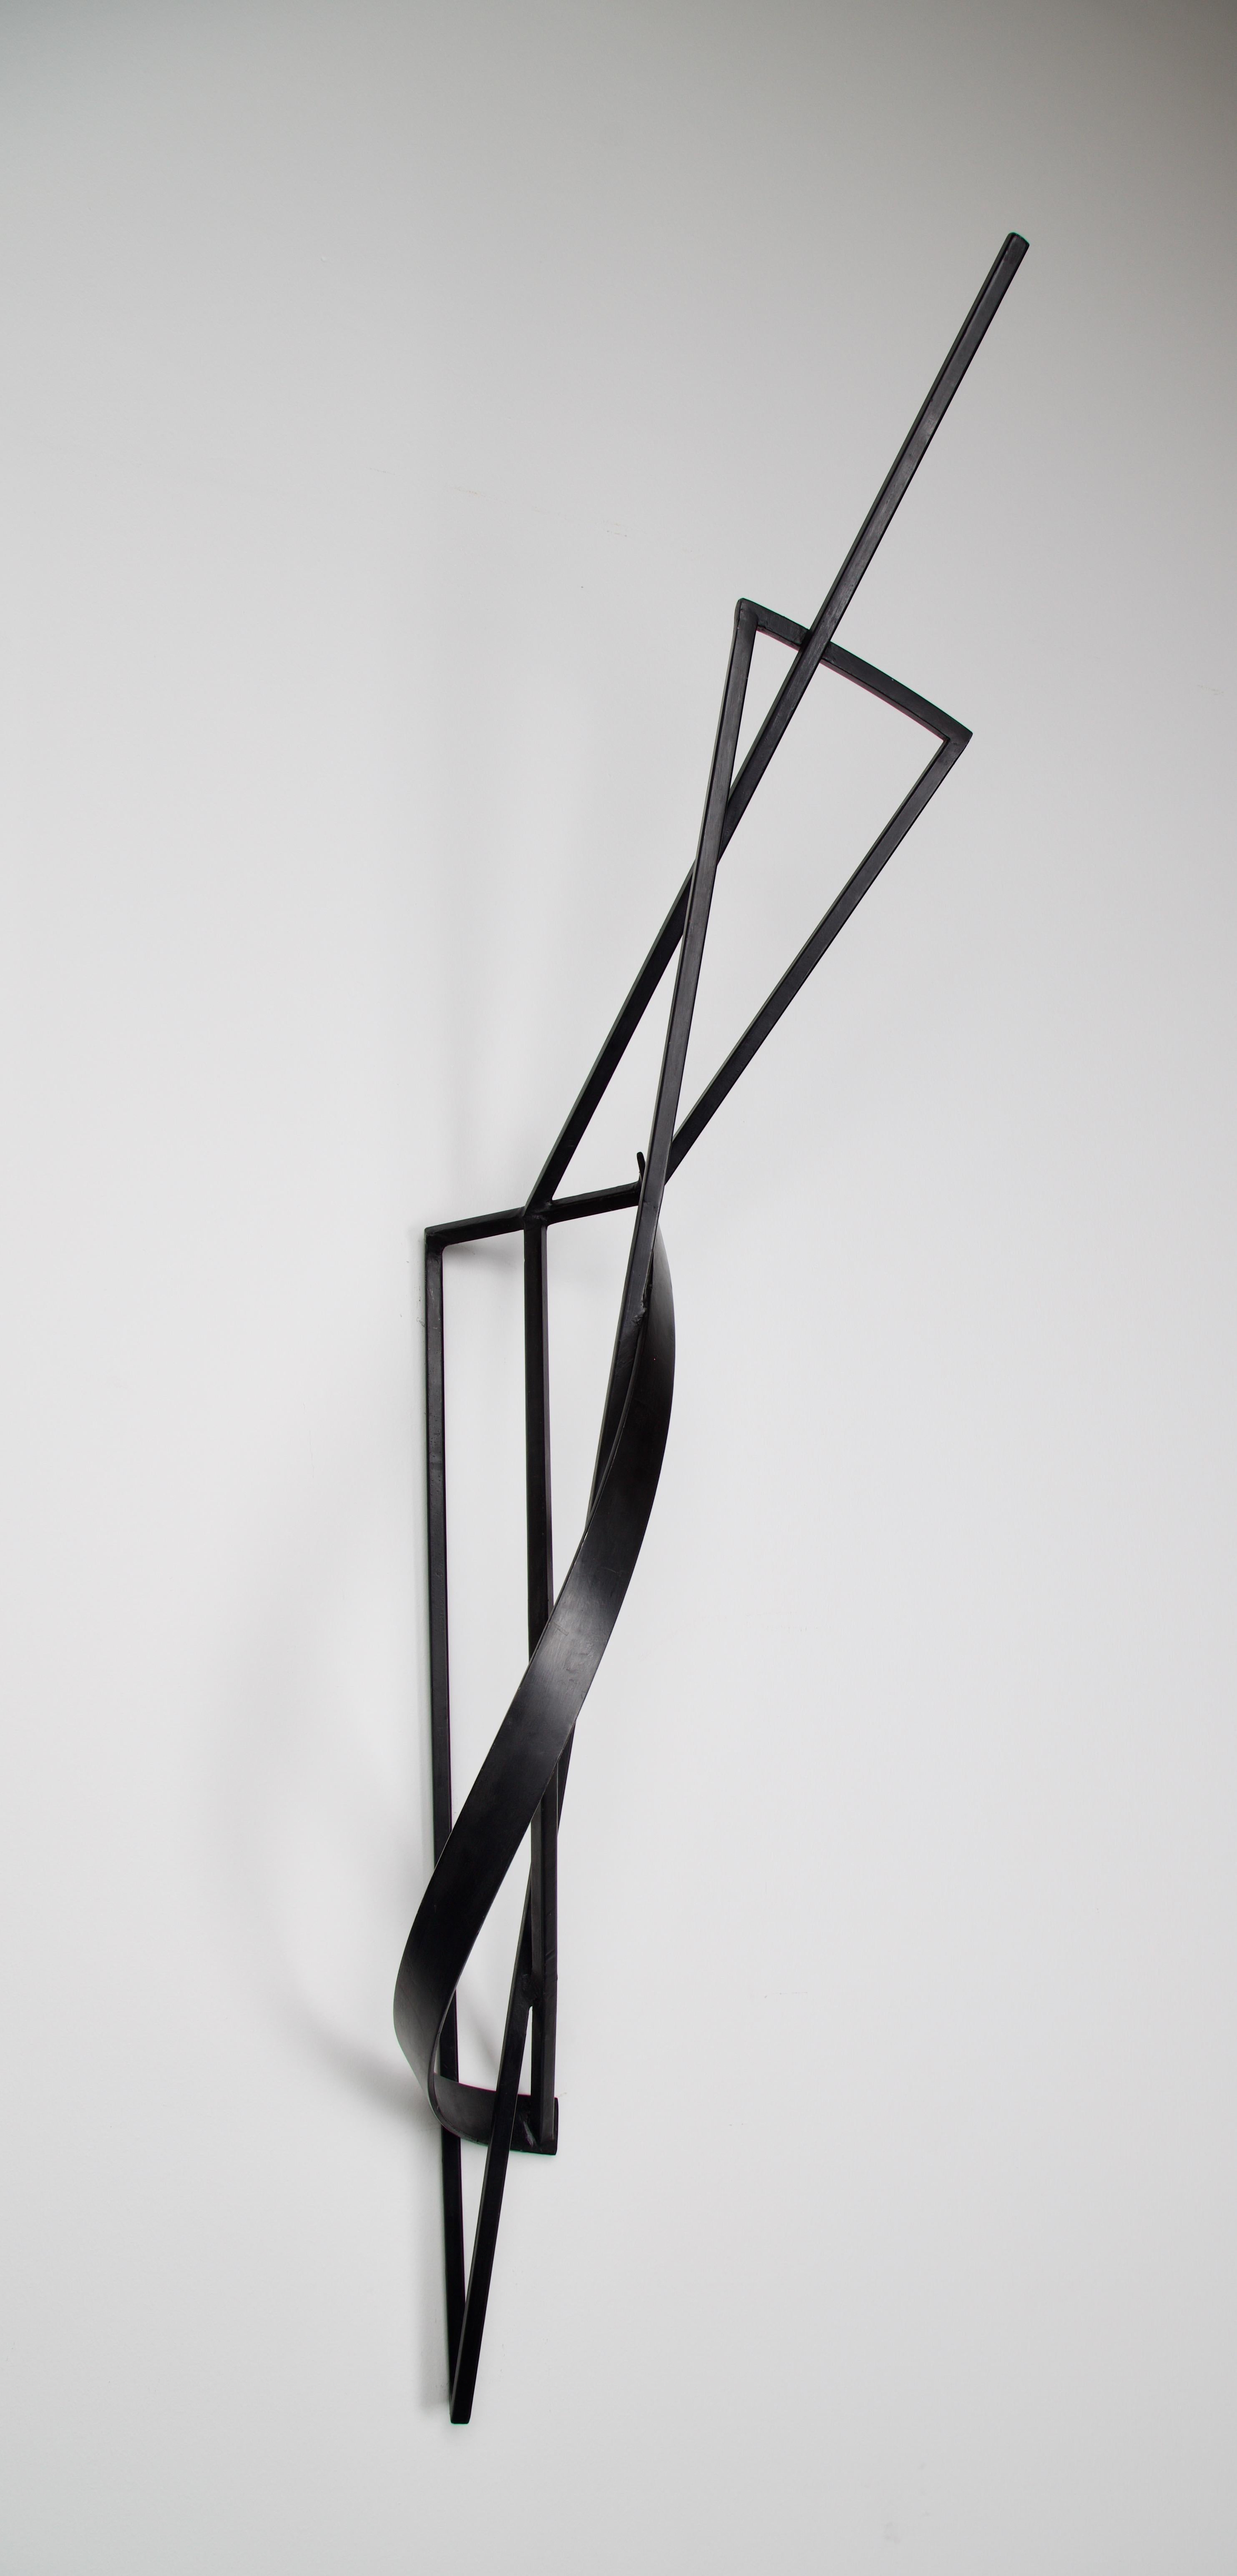 20th Century Contemporary Steel Wall Sculpture Signed by Tom Hollenback For Sale